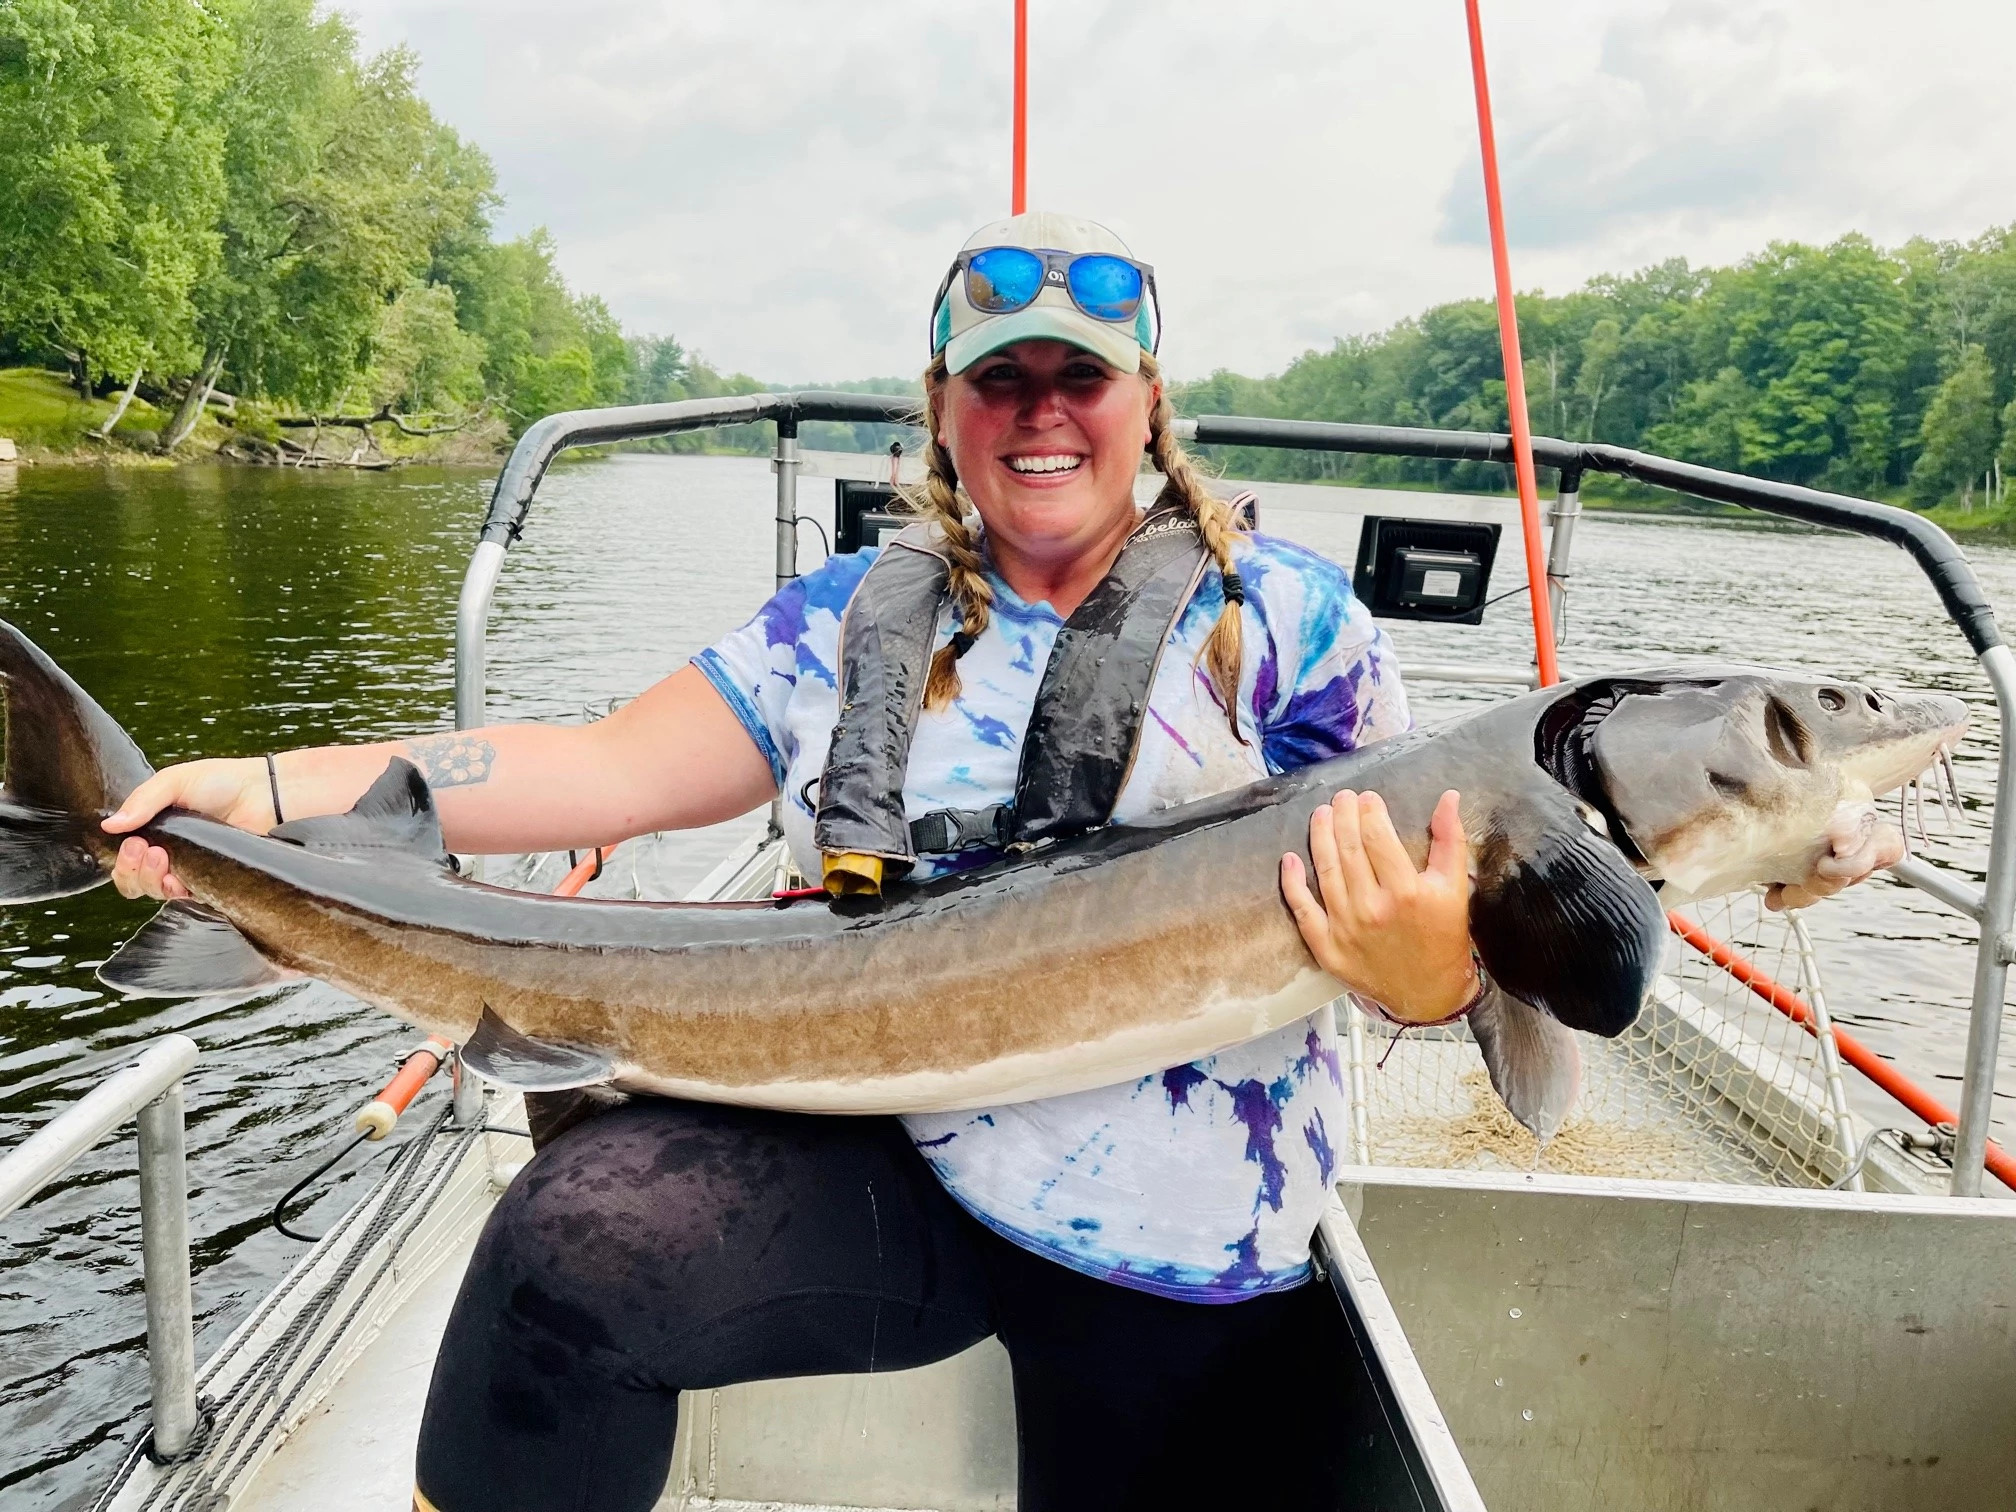 DNR Fisheries Technician Katie Renschen with a lake sturgeon captured during a 2021 electrofishing survey on the Menominee River